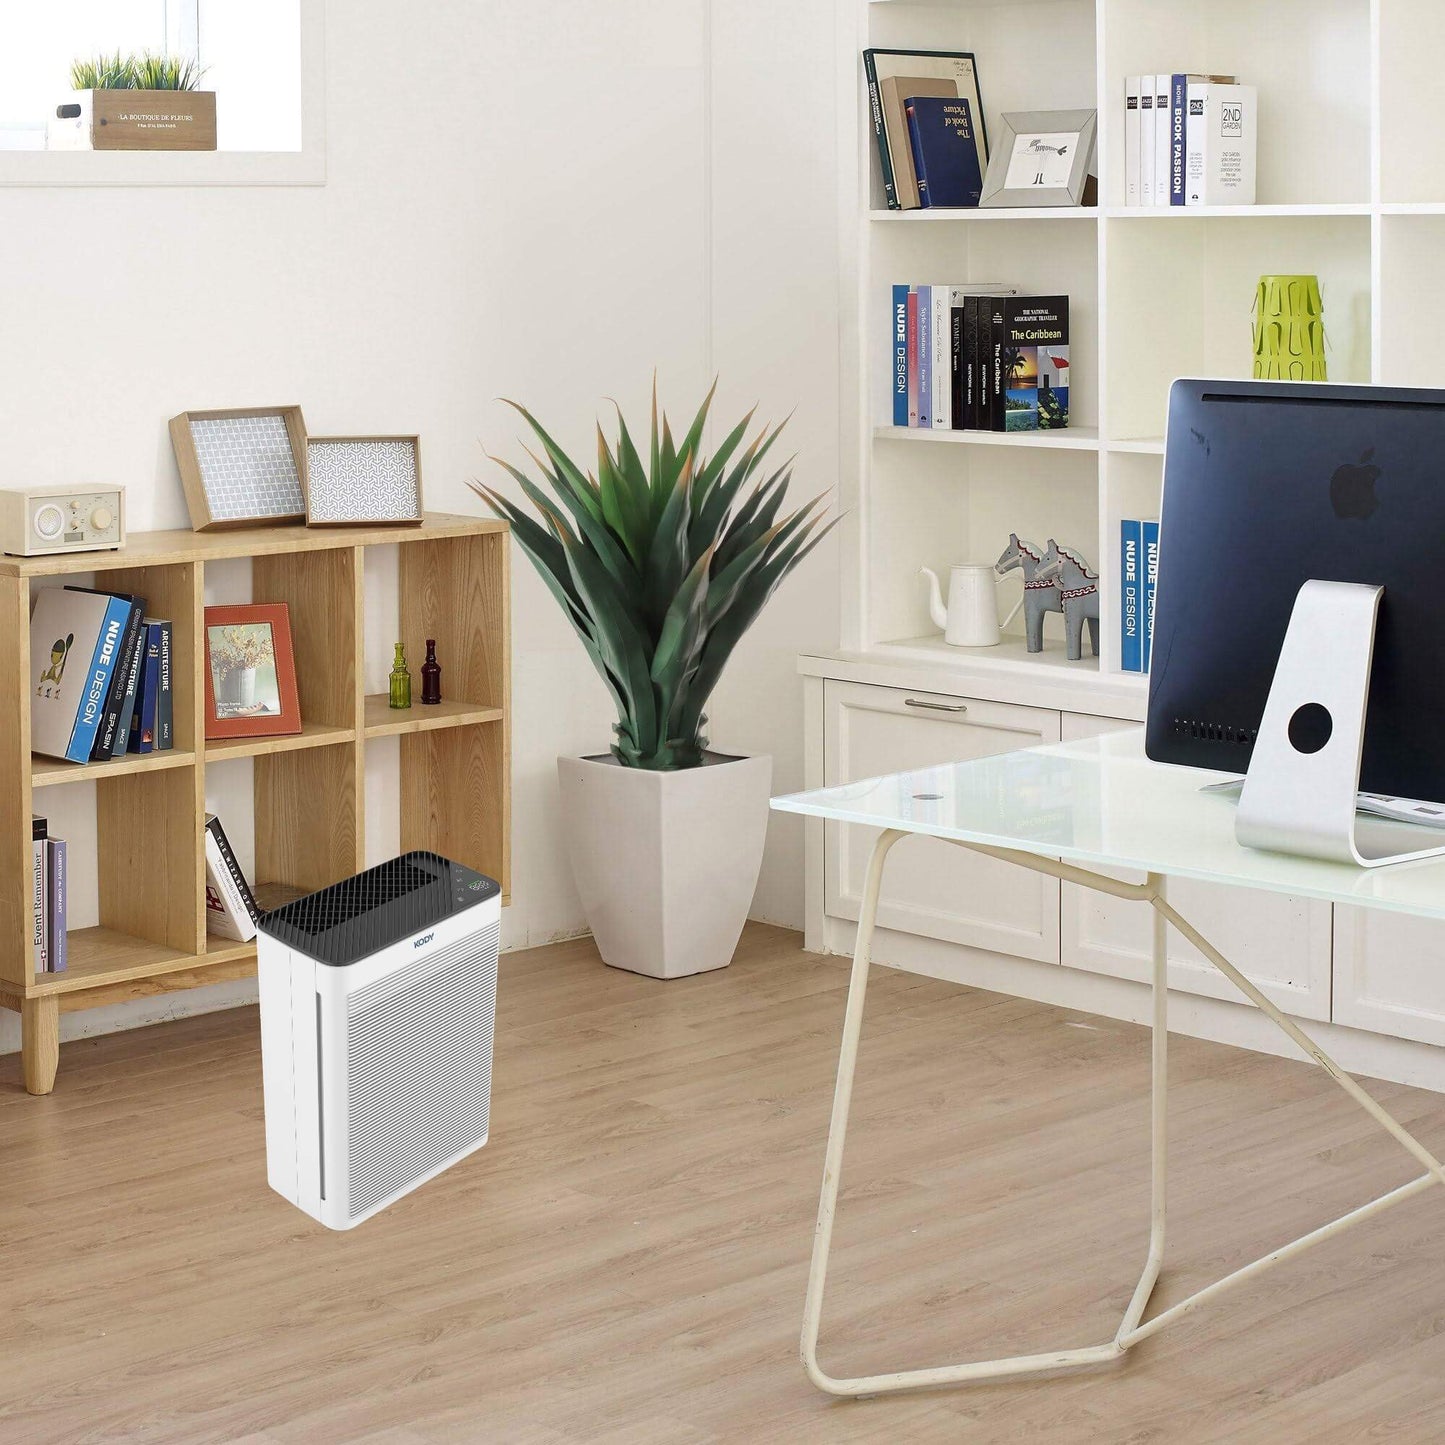 Hepa Air Purifier with True HEPA Filter and Activated Carbon Filter, Portable Home Air Cleaner Australia